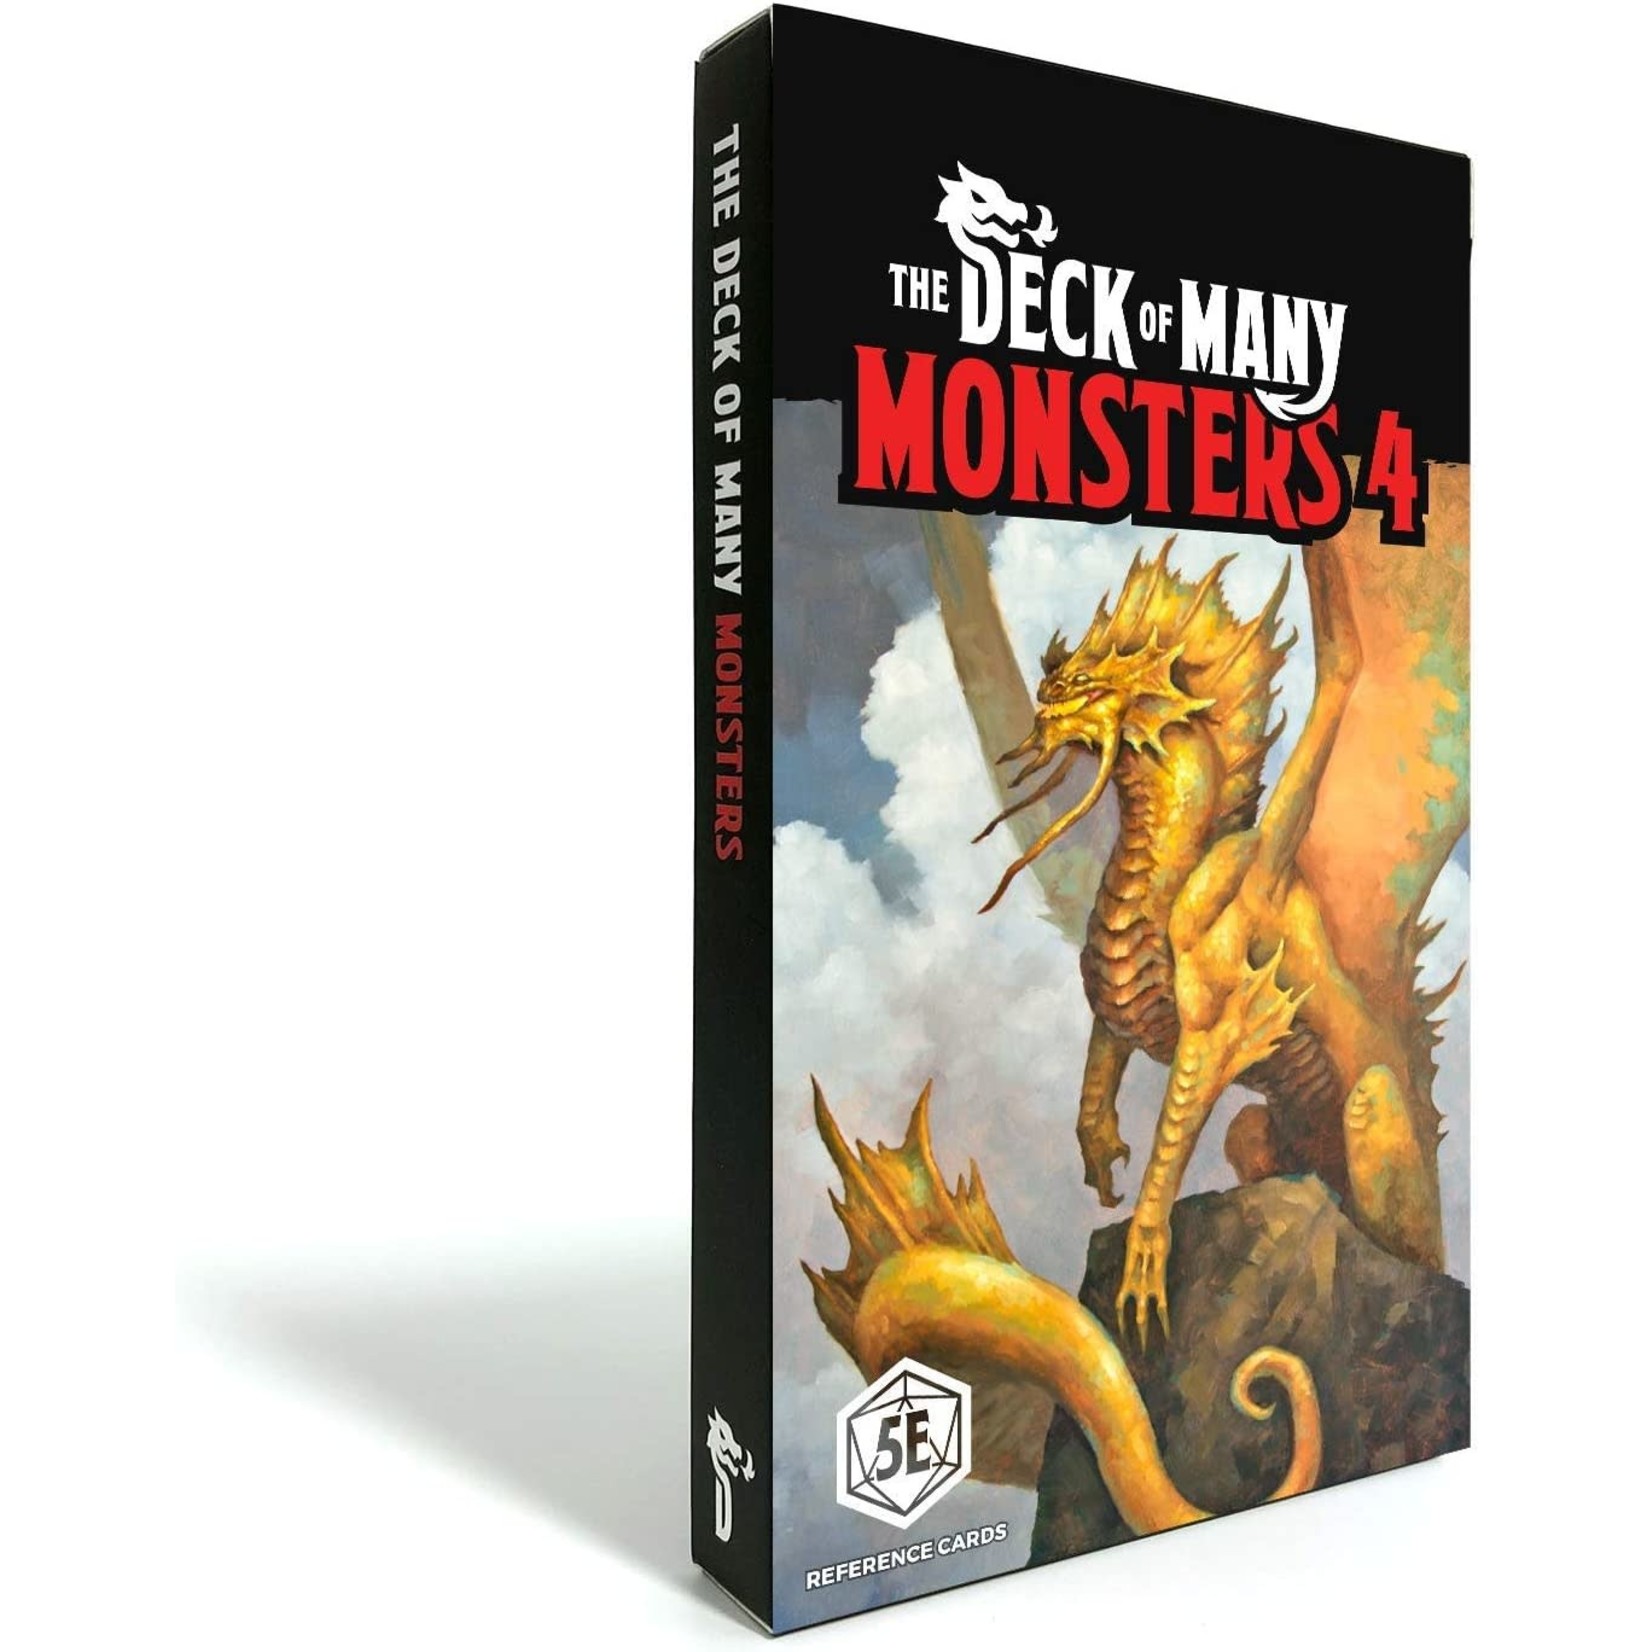 Hitpoint Press Deck of Many Monsters 4